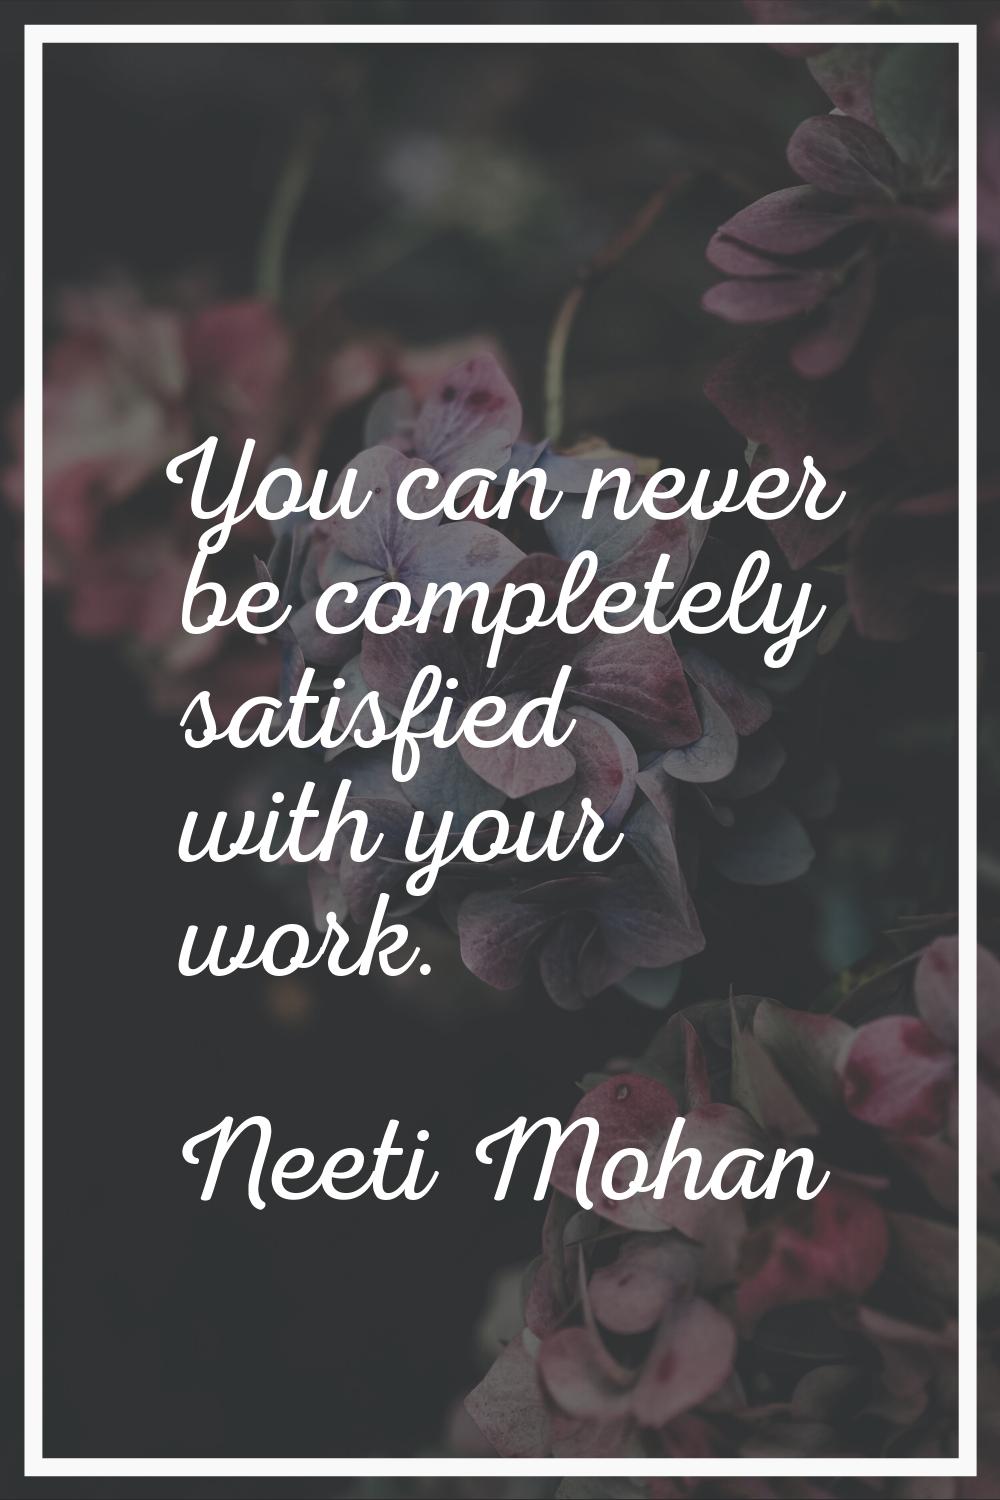 You can never be completely satisfied with your work.